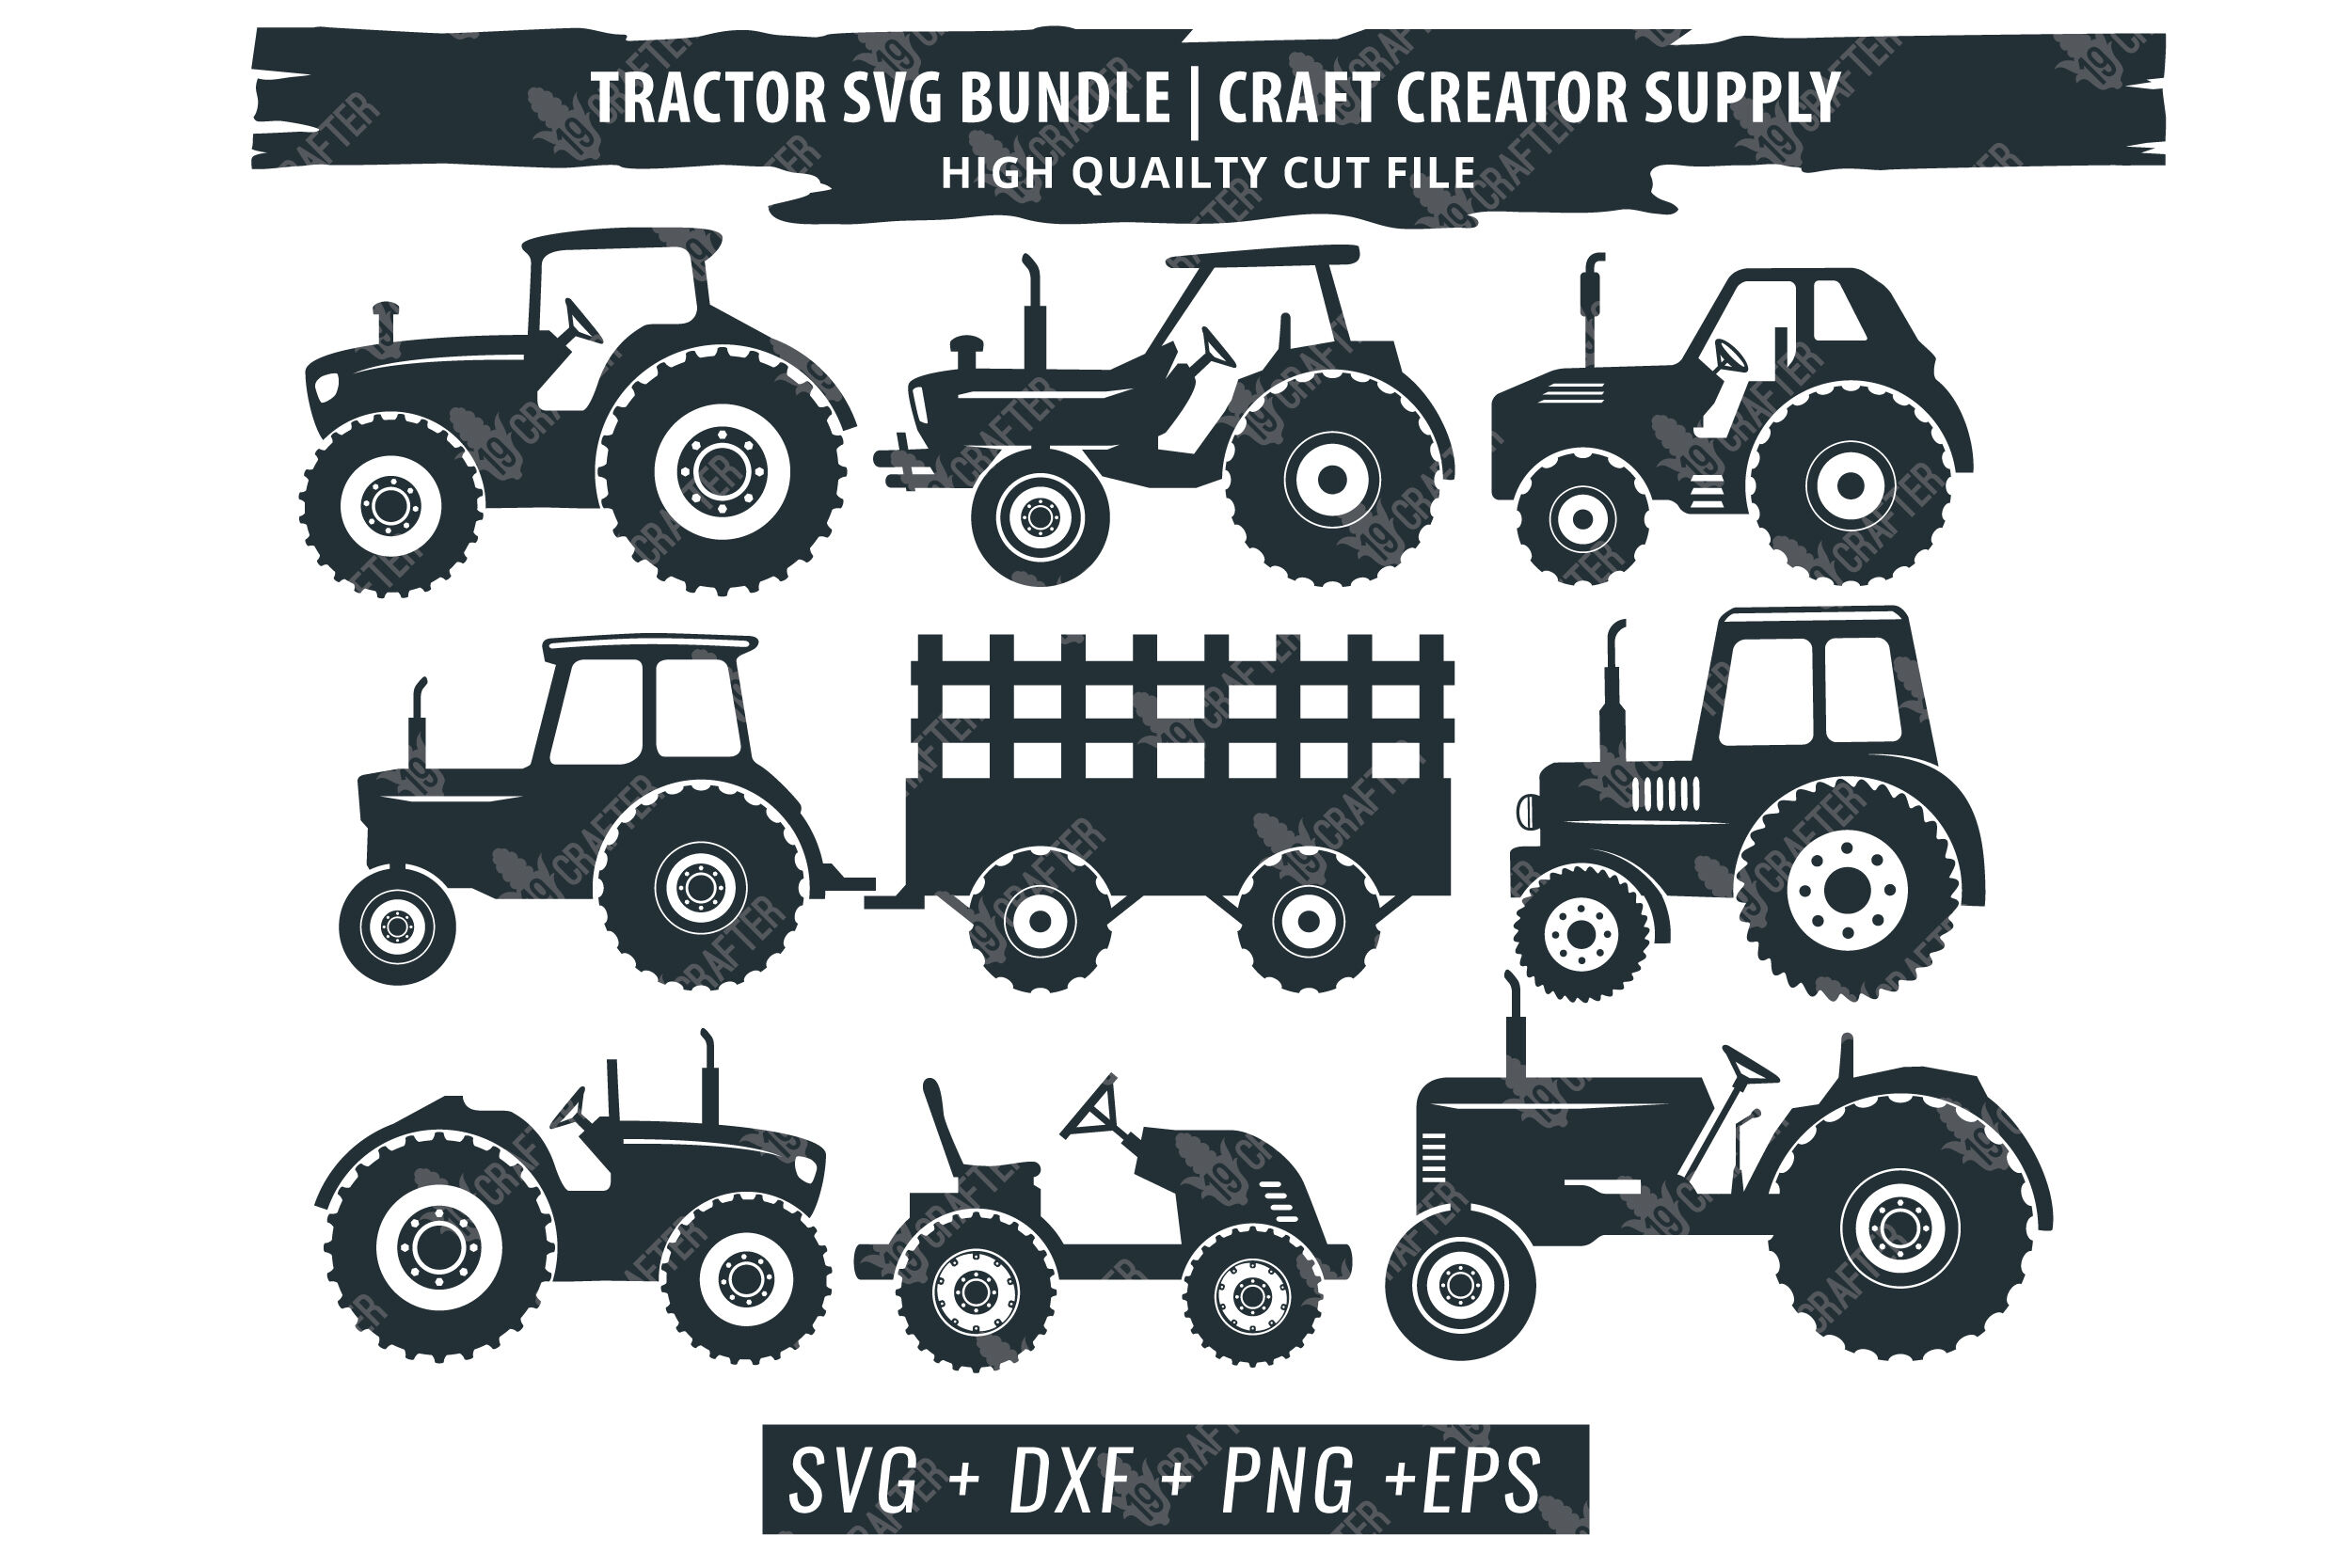 Download Farm Tractor Svg Bundle Simple And Detail Quality By Greatype19 Thehungryjpeg Com